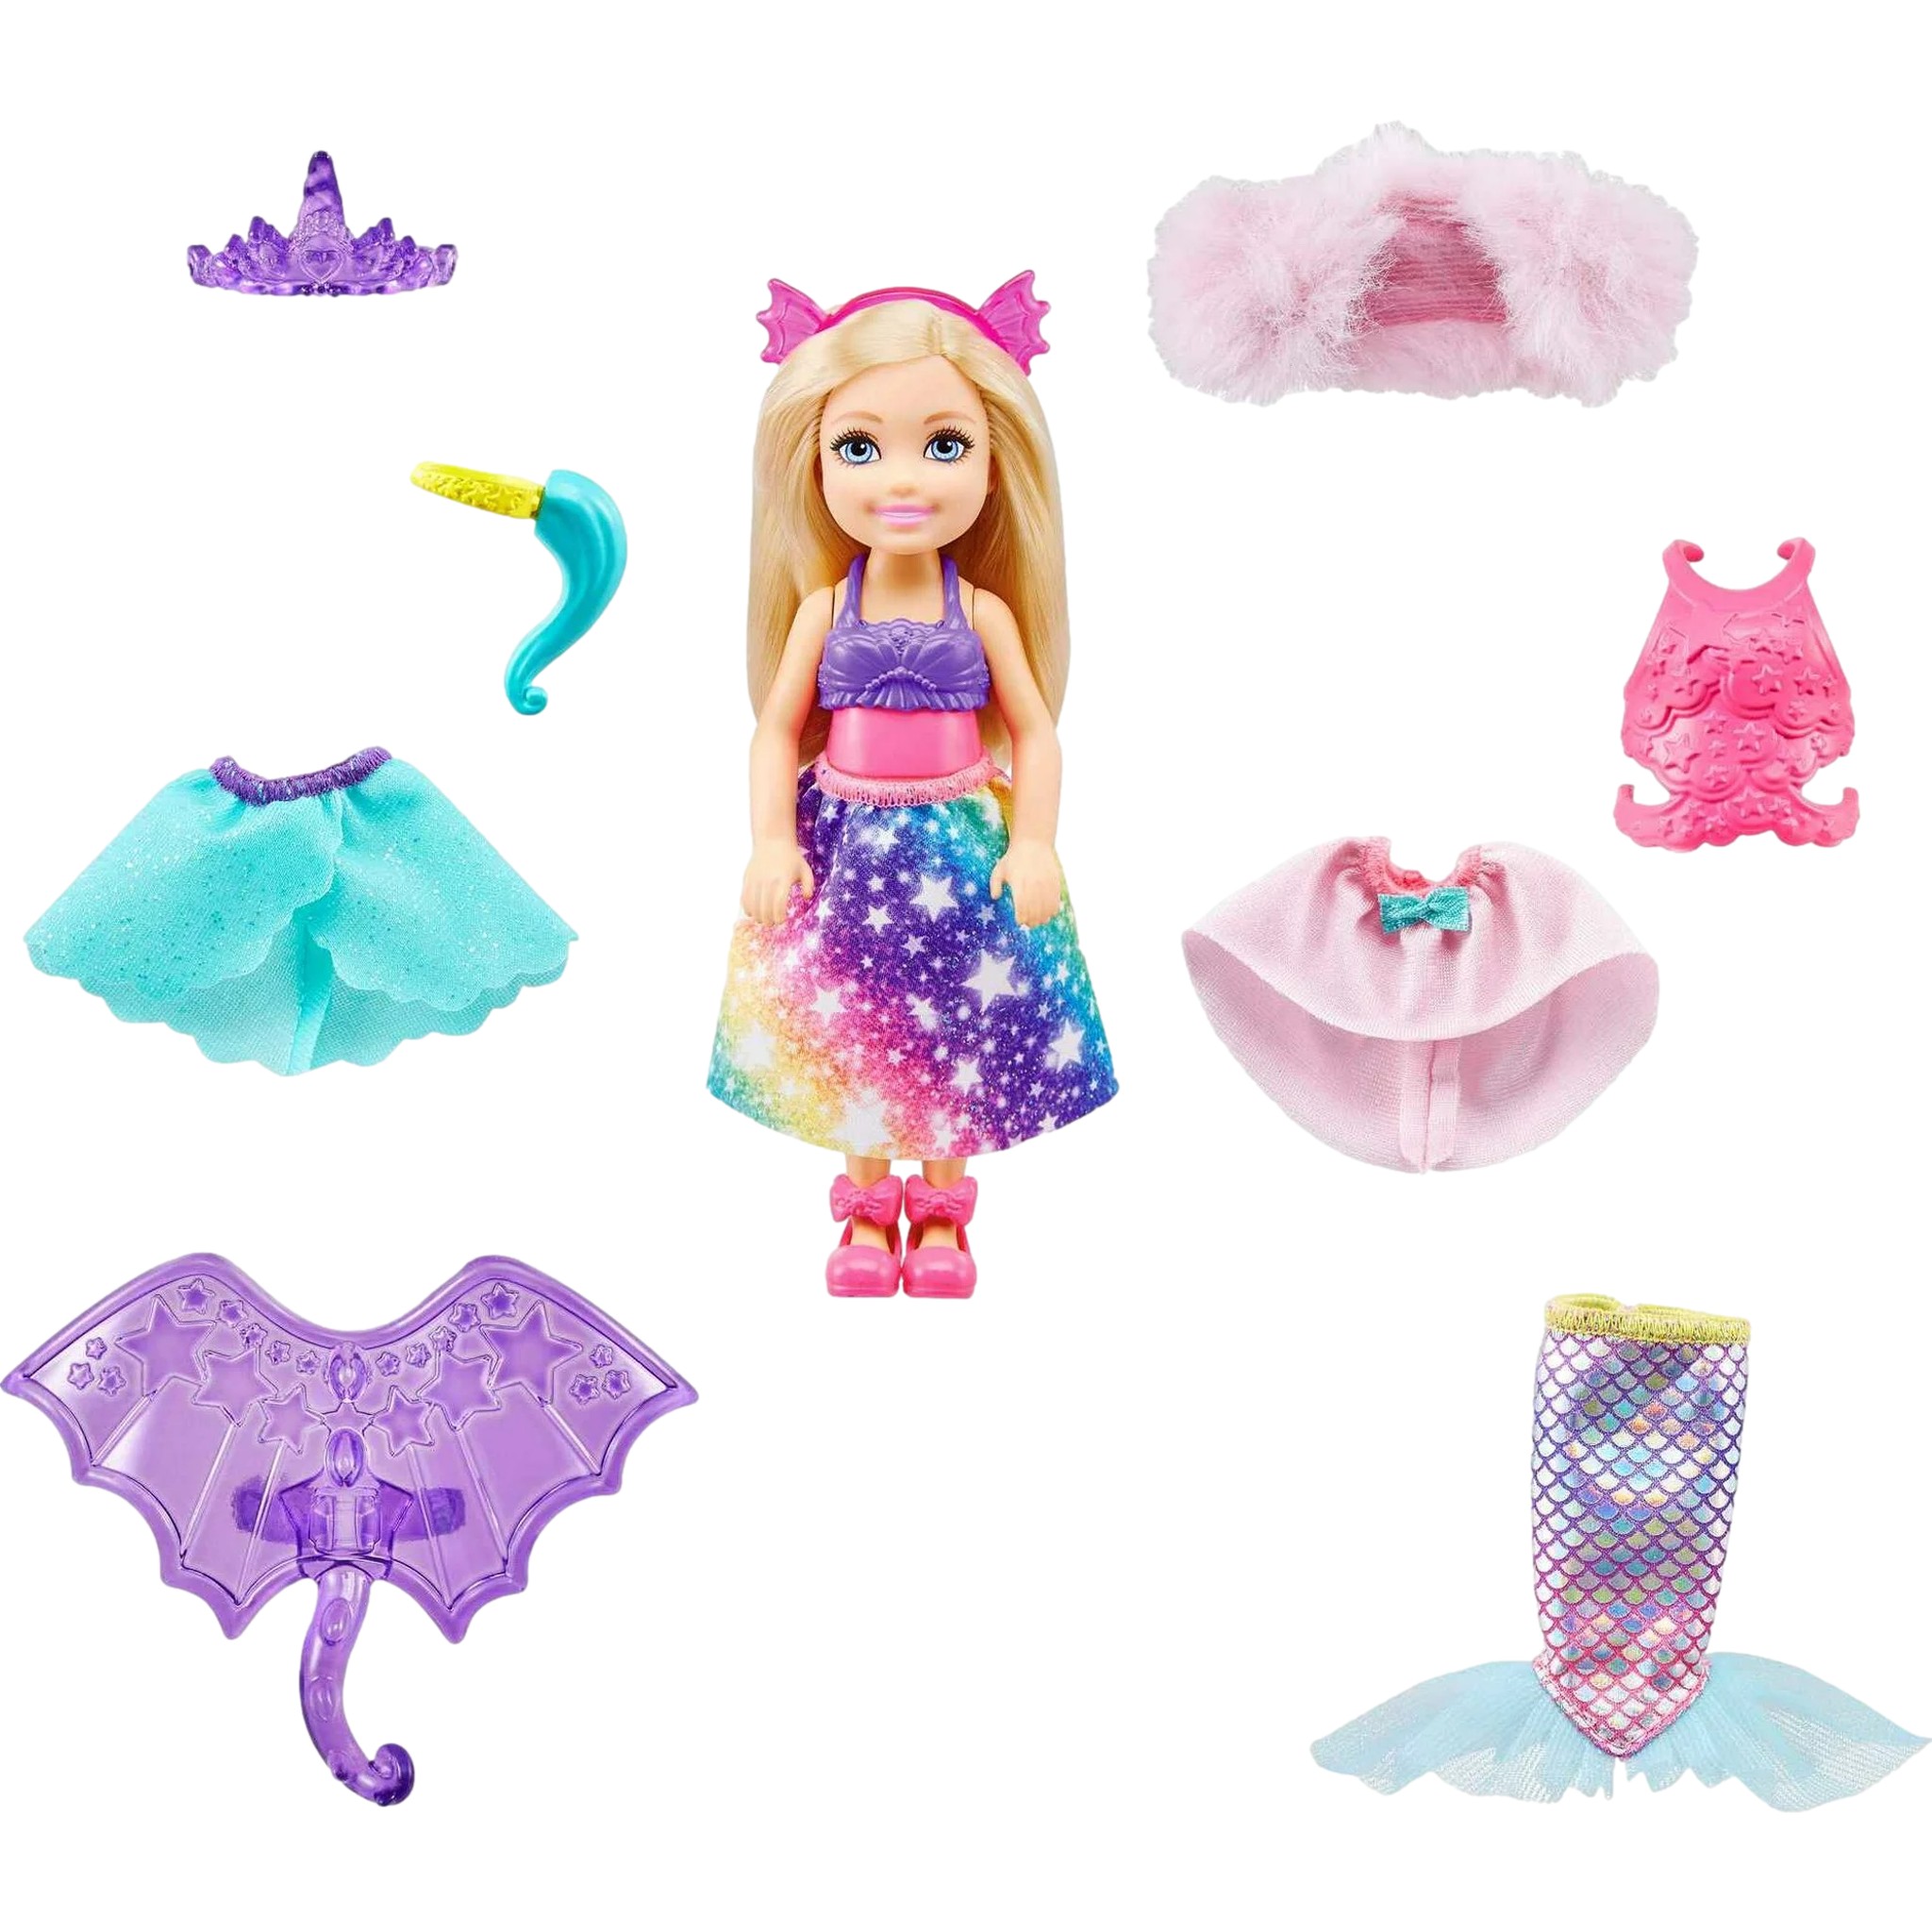 Barbie Dreamtopia Chelsea Doll Dress-Up Set with 12 Fashion Pieces Playset